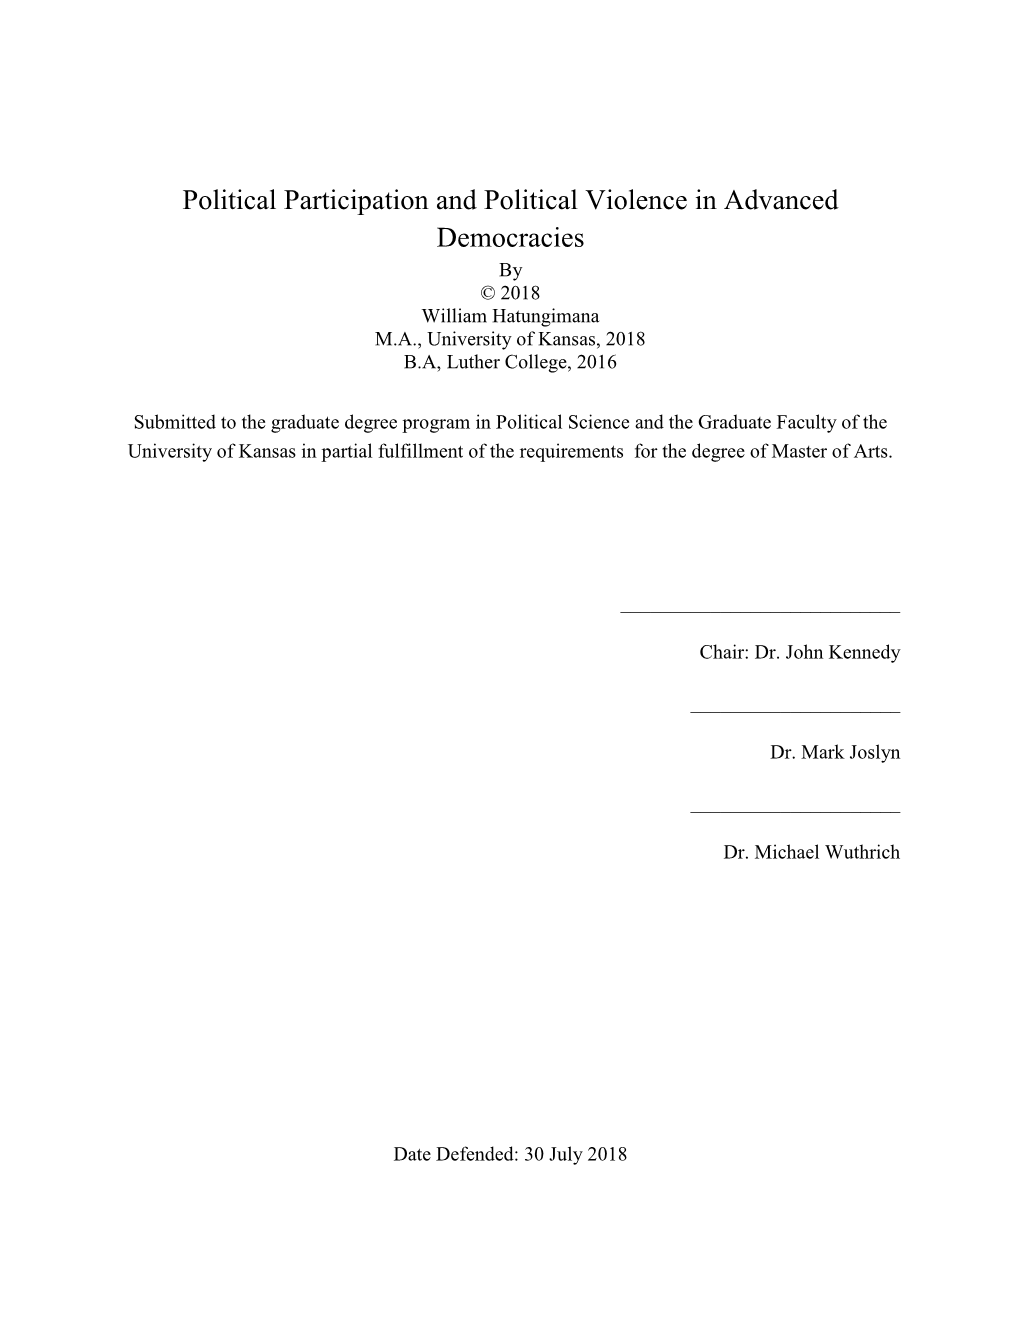 Political Participation and Political Violence in Advanced Democracies by © 2018 William Hatungimana M.A., University of Kansas, 2018 B.A, Luther College, 2016